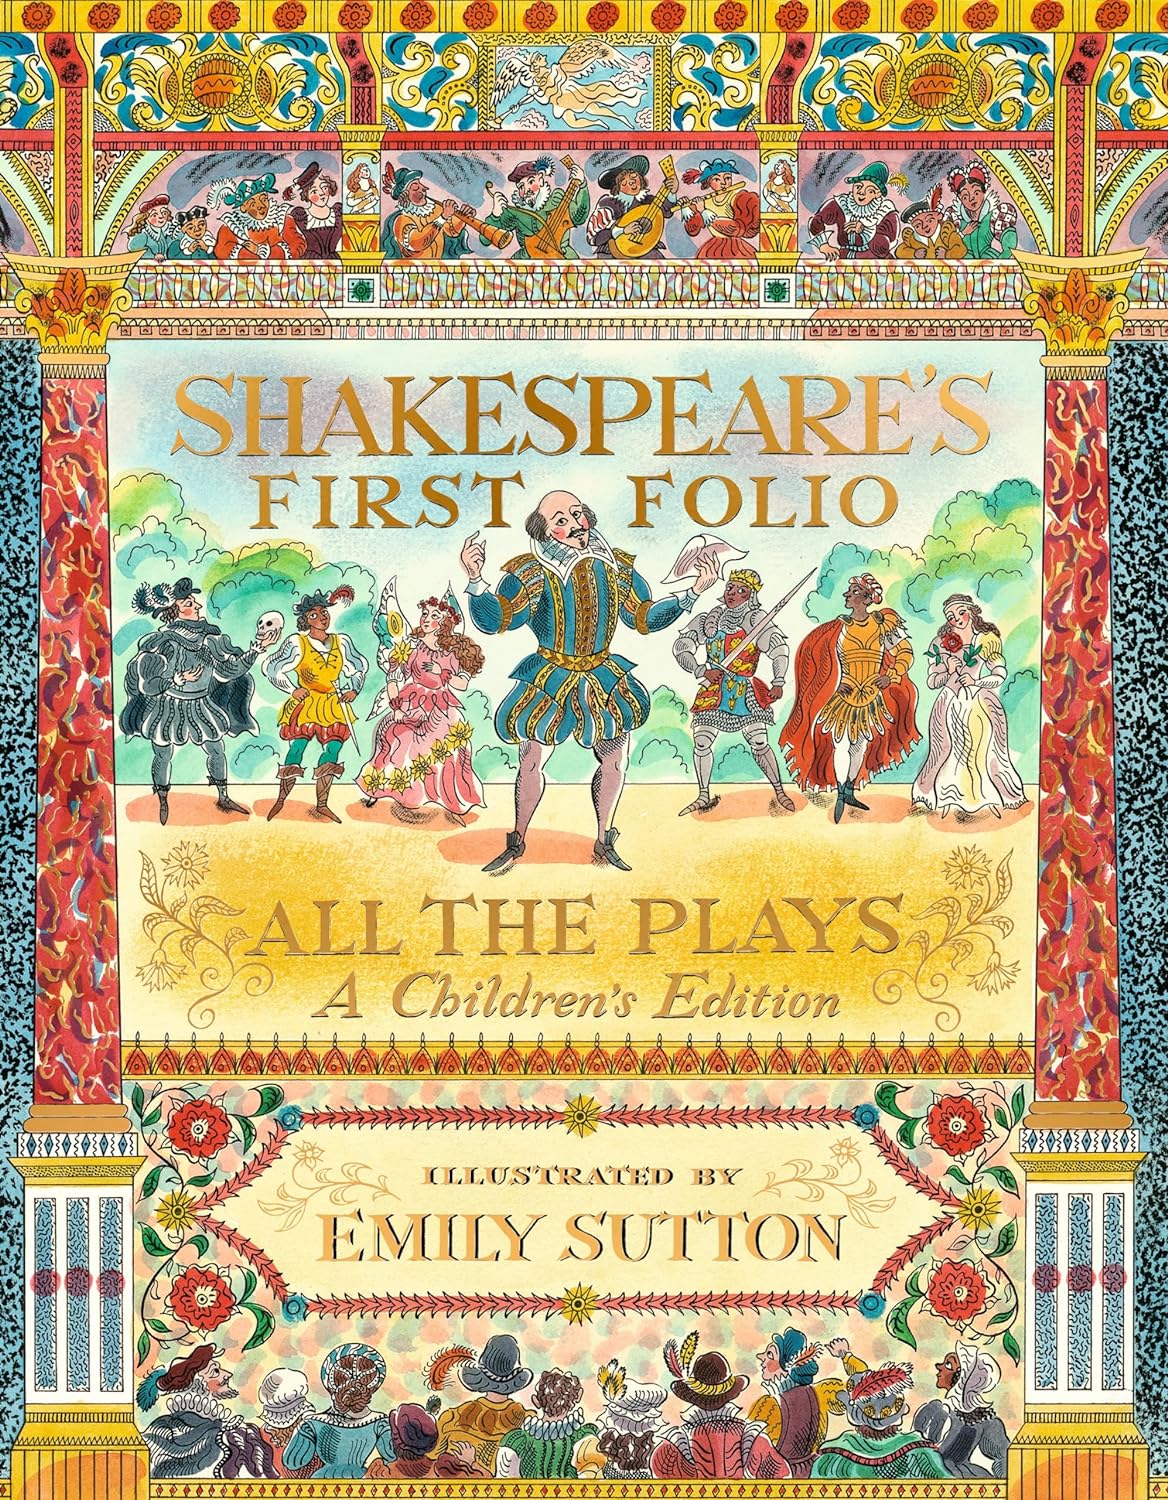 Shakespeare's First Folio: All The Plays (A Children's Edition)